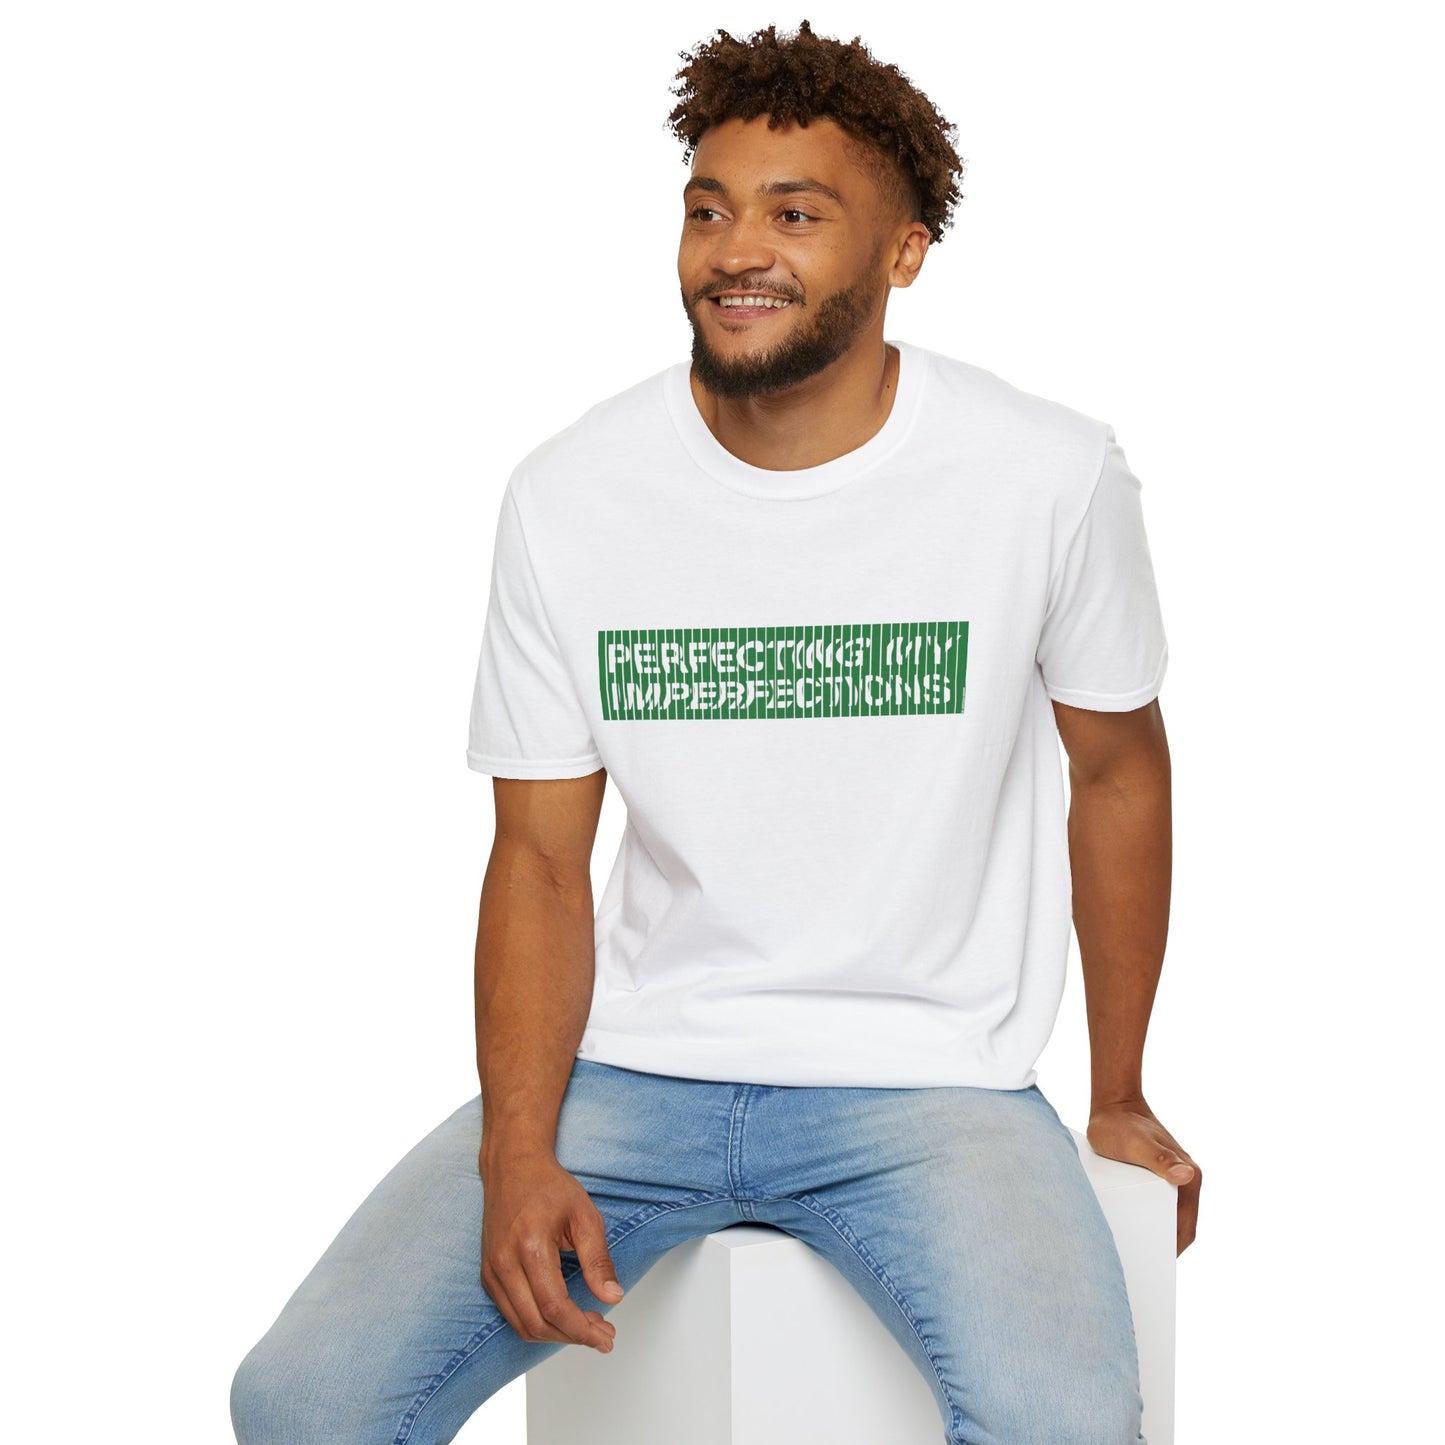 Perfecting My Imperfections Unisex Softstyle T-Shirt